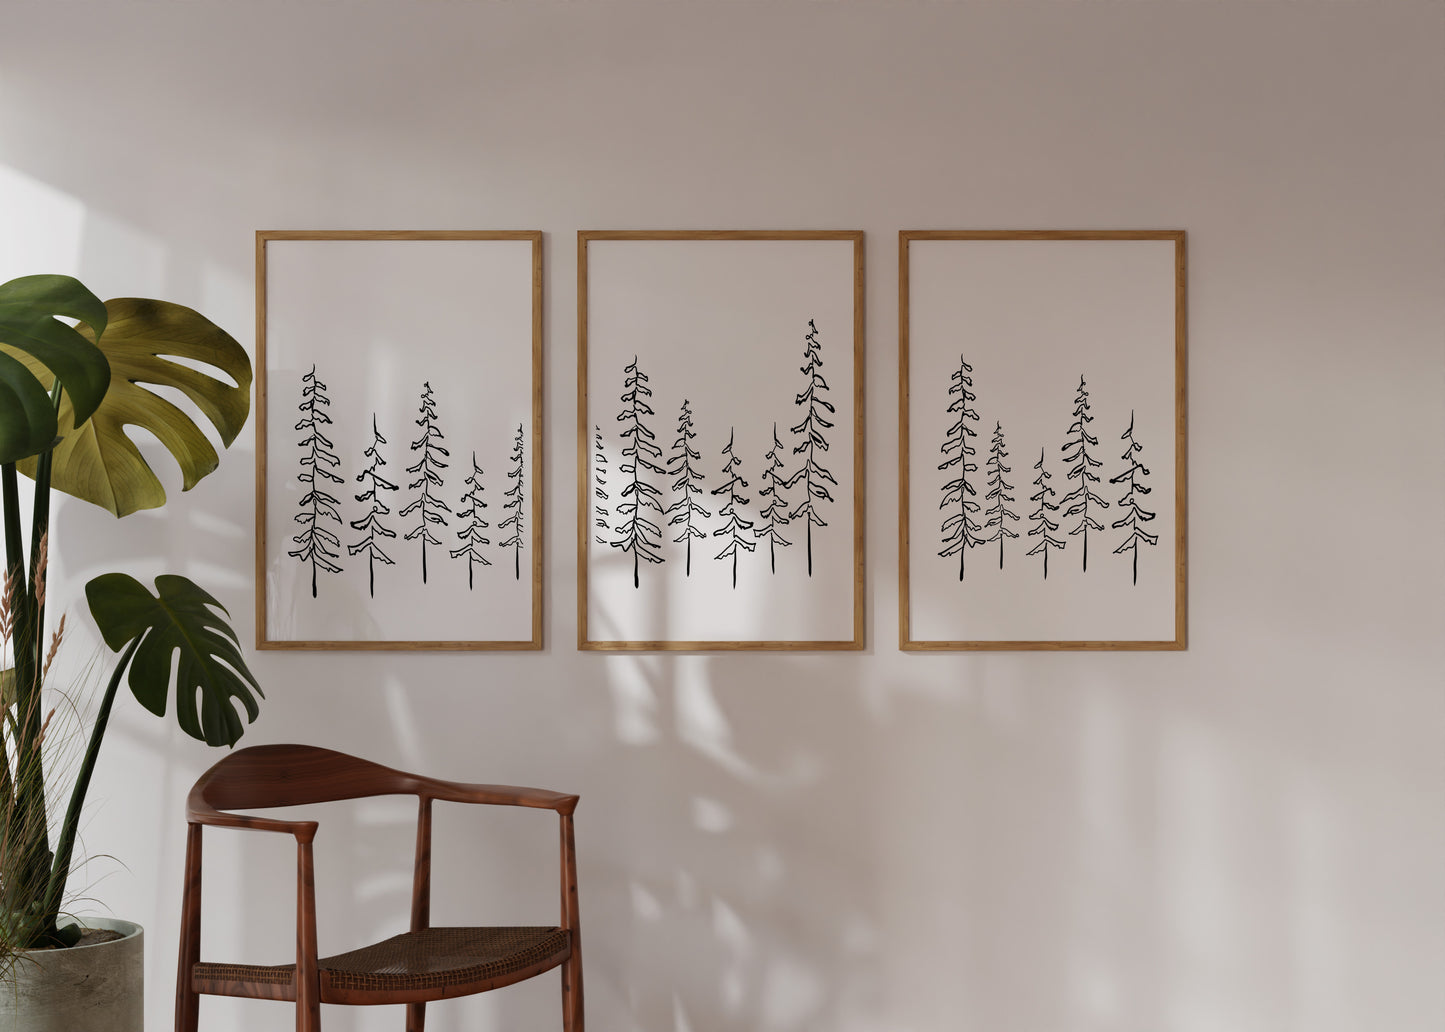 Three One Line Drawings of Trees